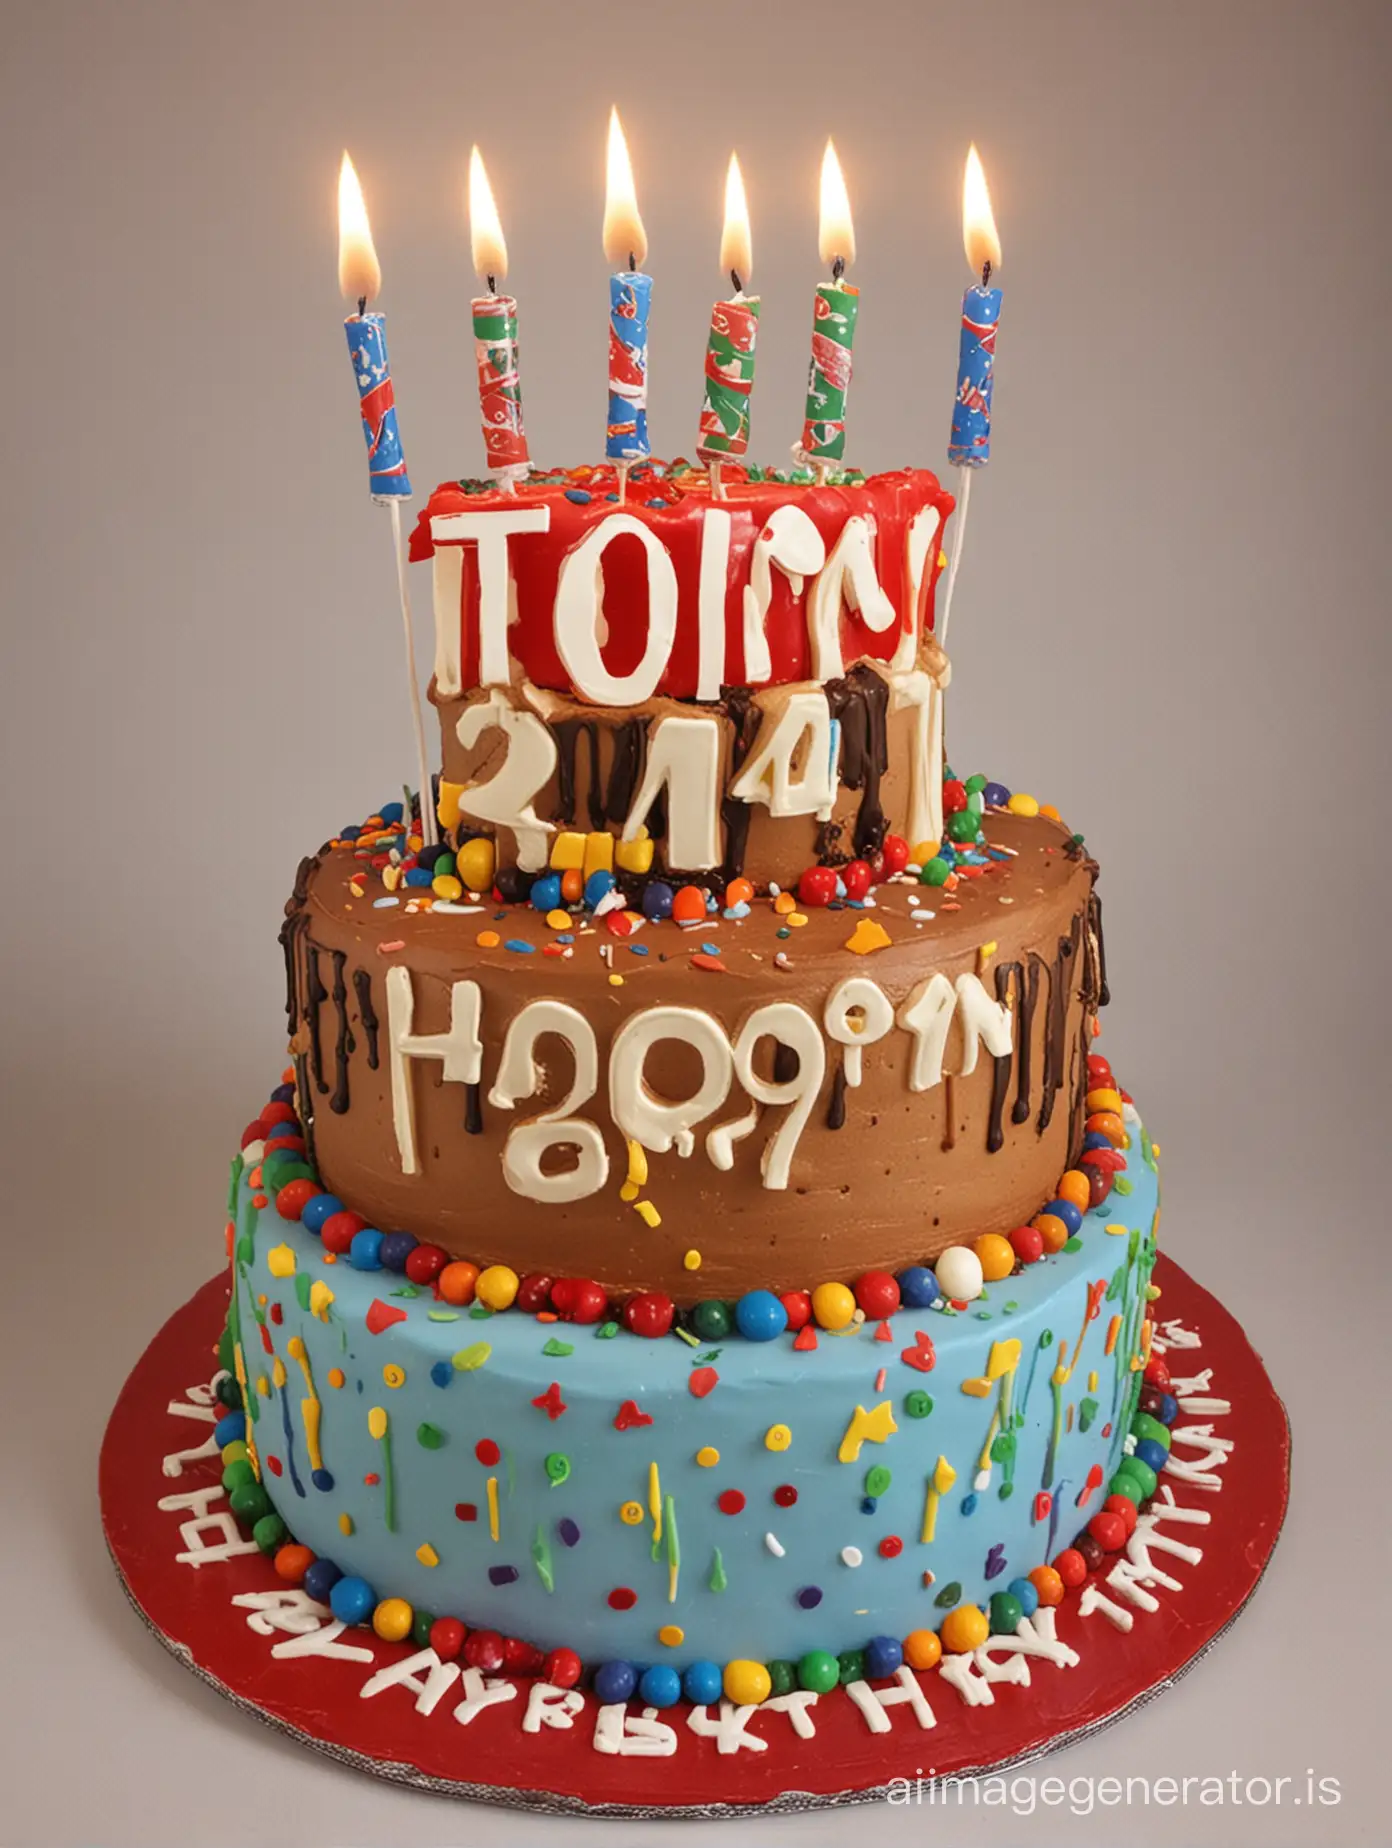 Happy Birthday, Tom cake with 41 candles, 